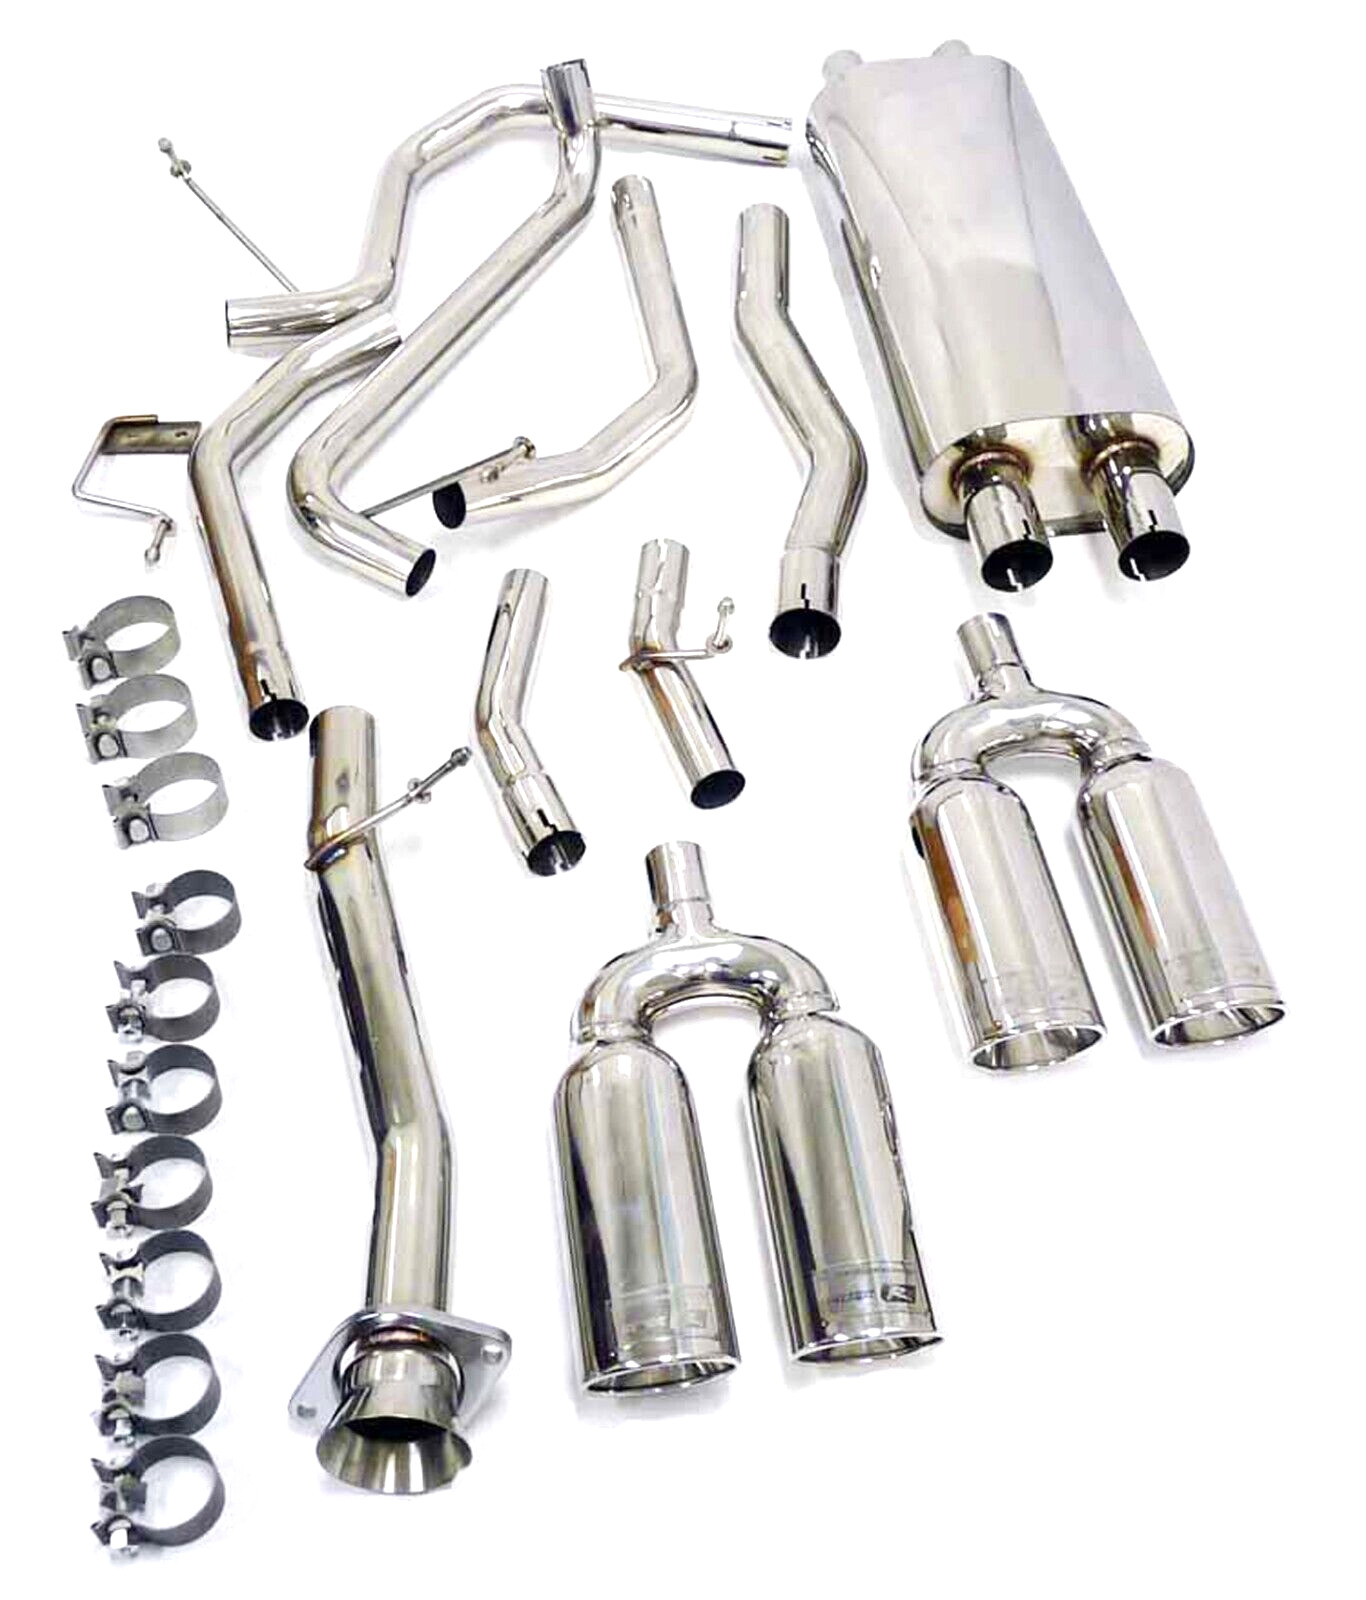 OBX Stainless Catback Exhaust Fits 03 to 06 Hummer H2 6.0L SUV/SUT 